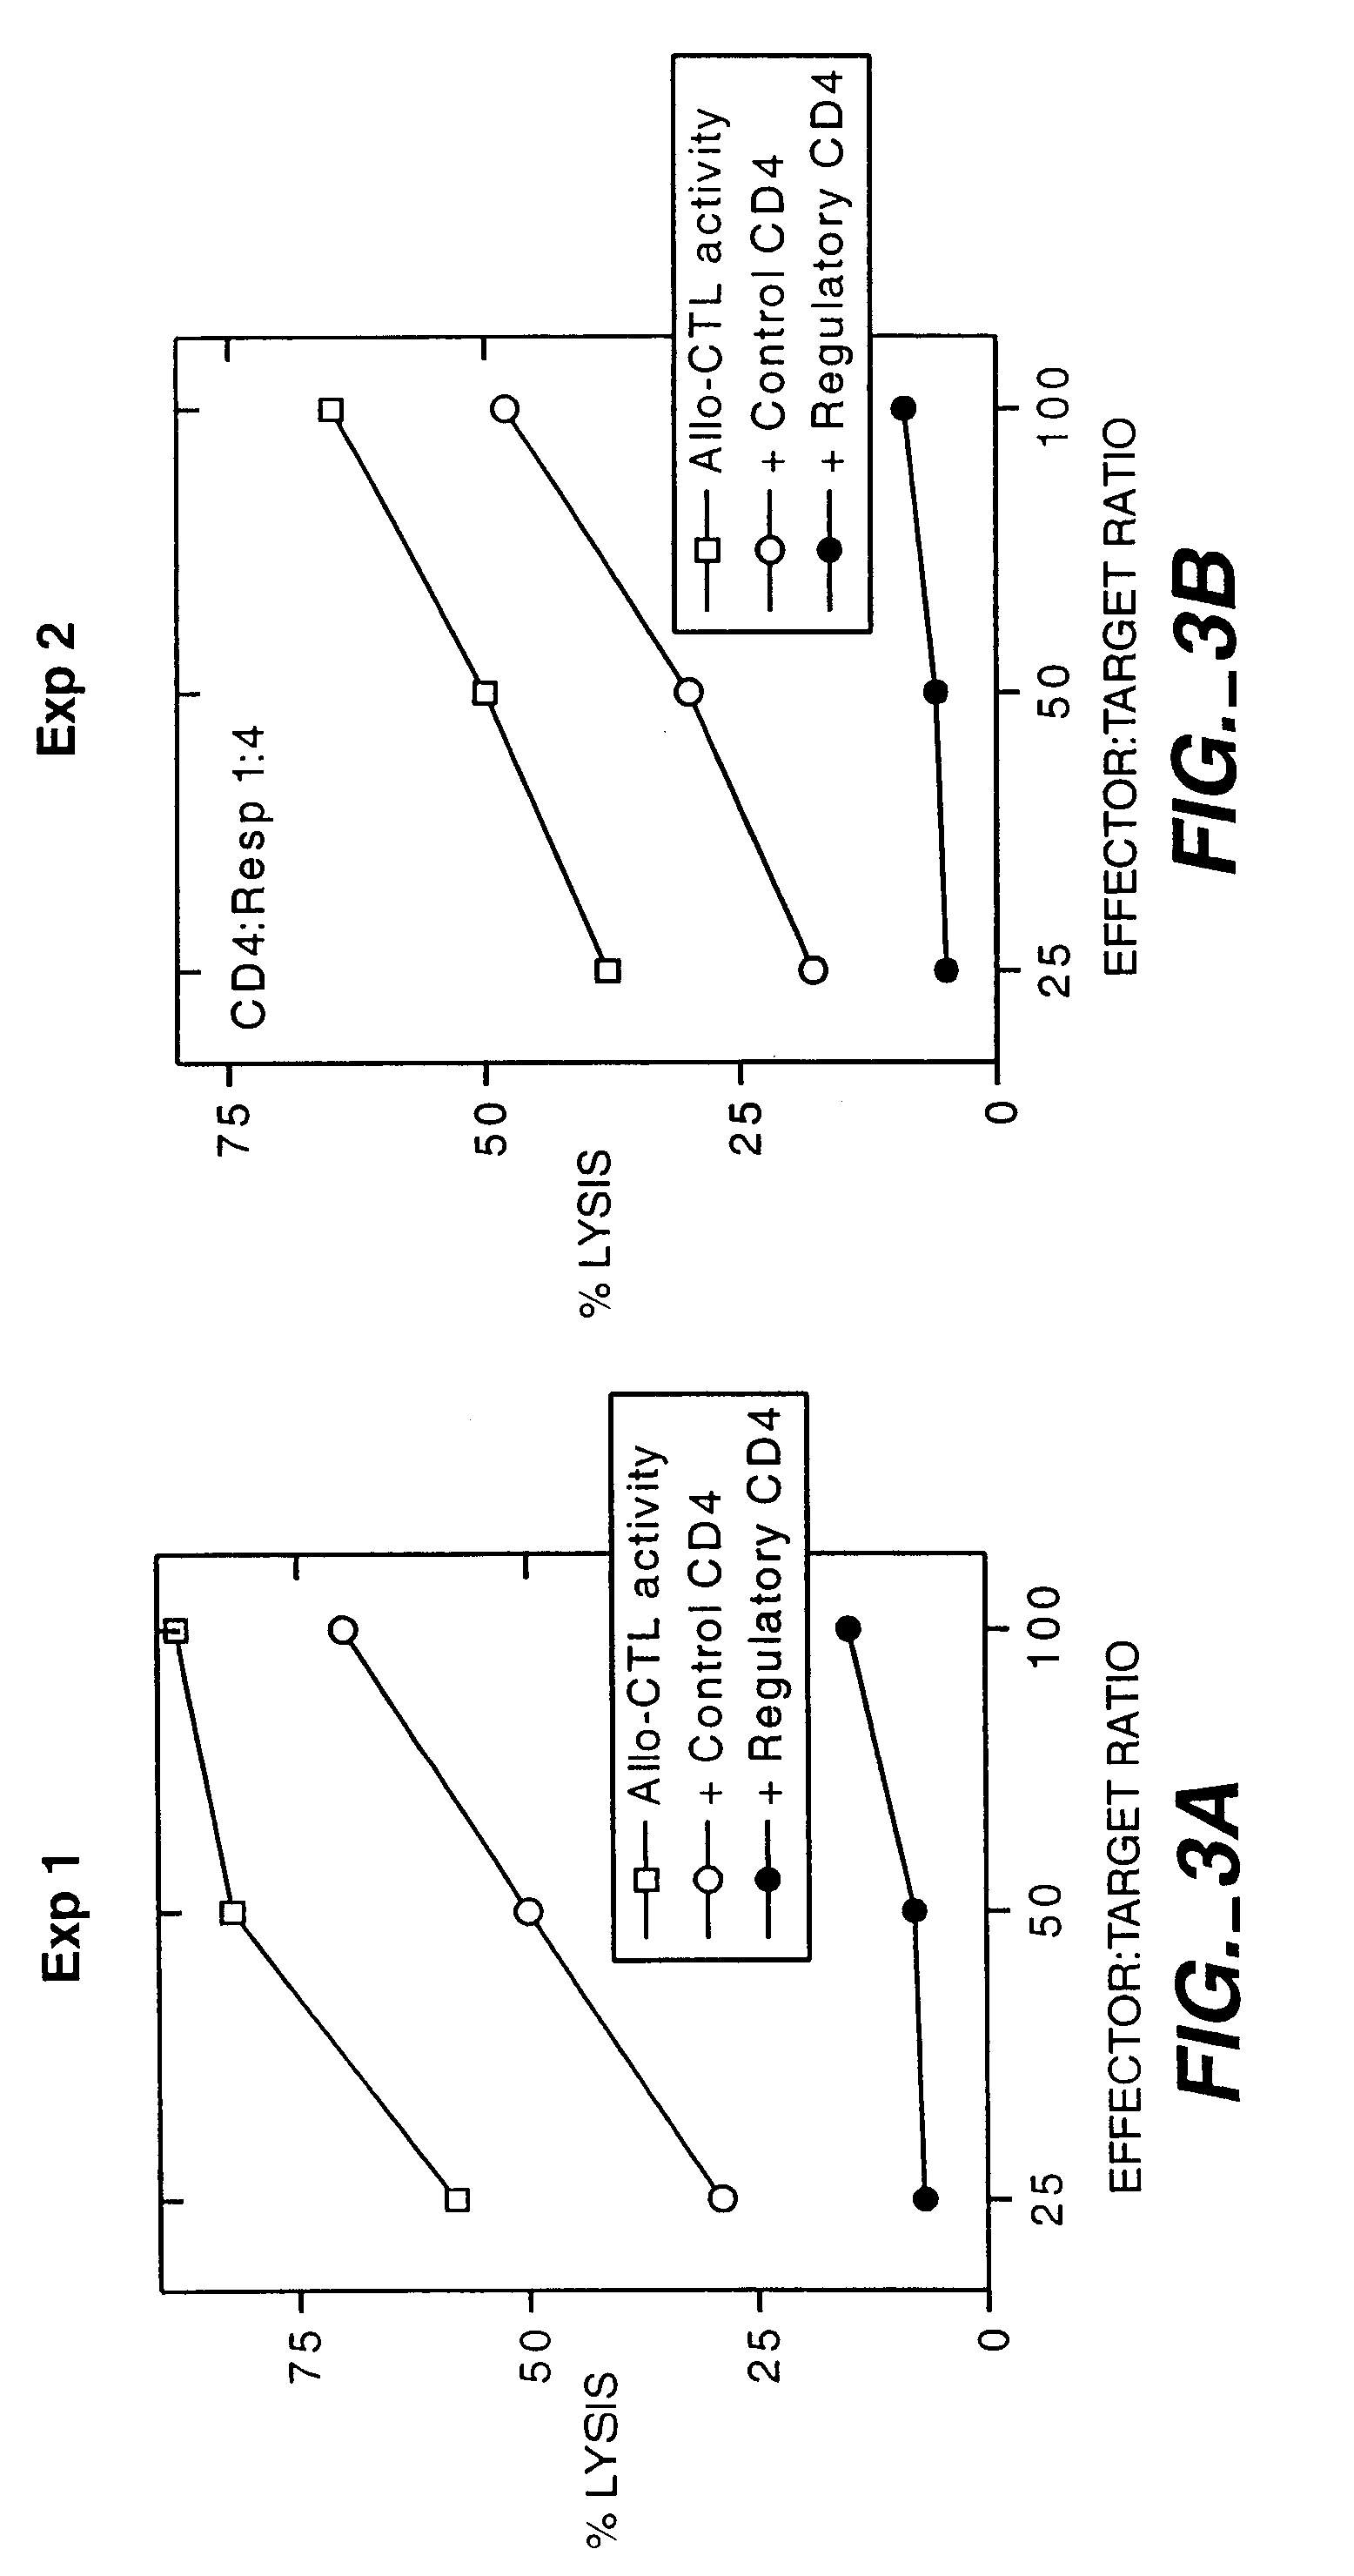 Method to Prevent Graft Rejection Using TGF-Beta to Induce T Suppressor Cells